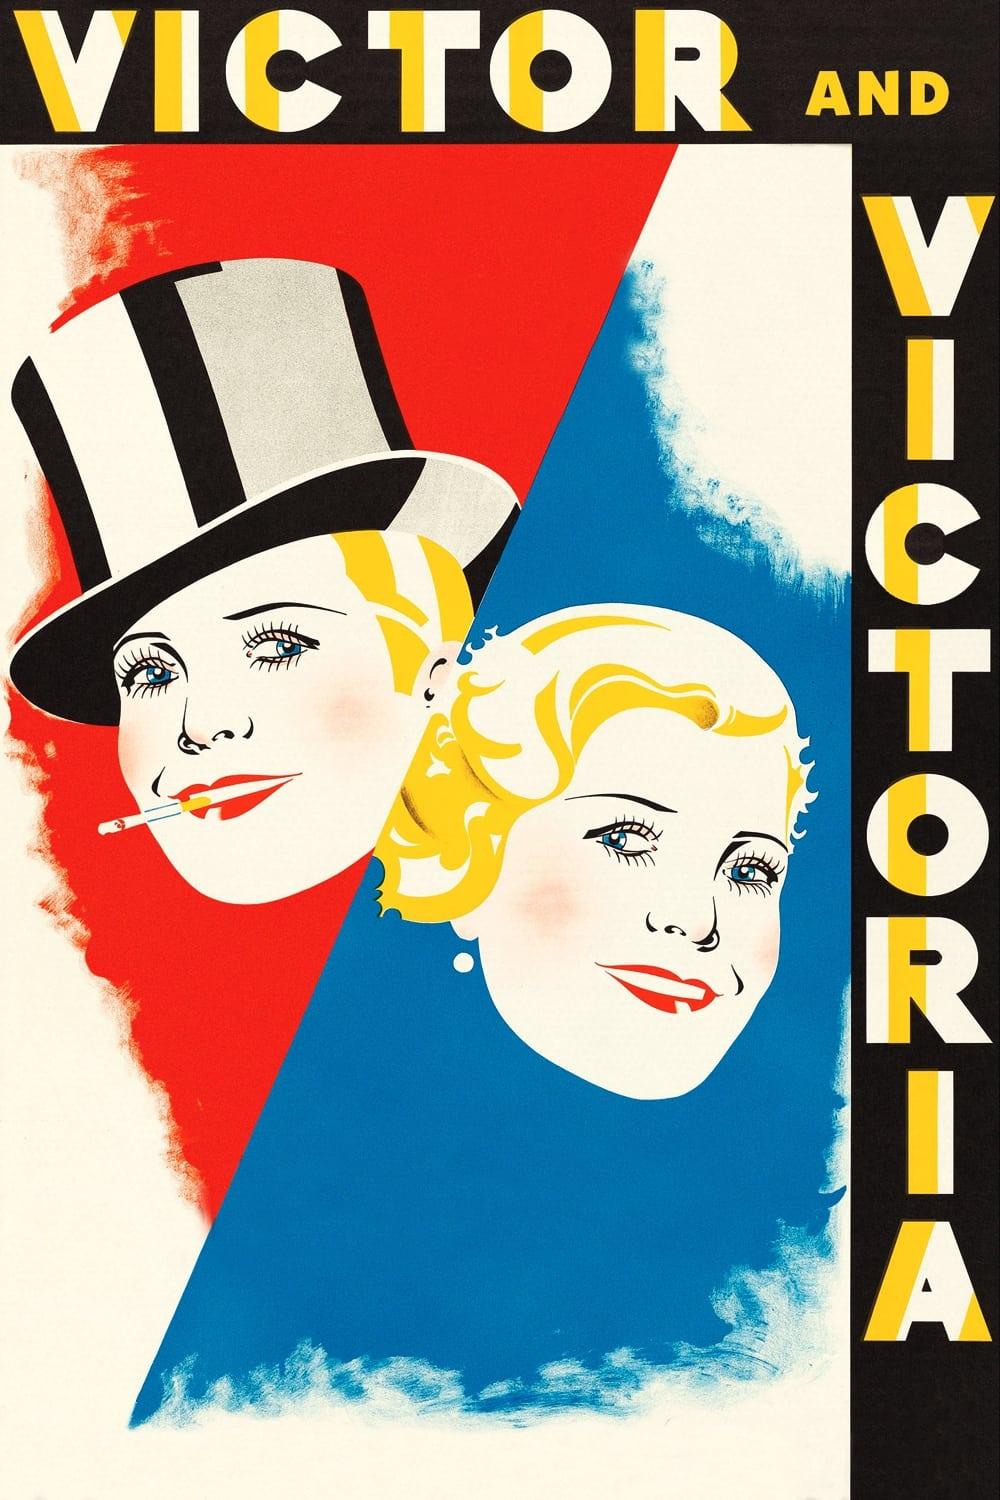 Victor and Victoria poster